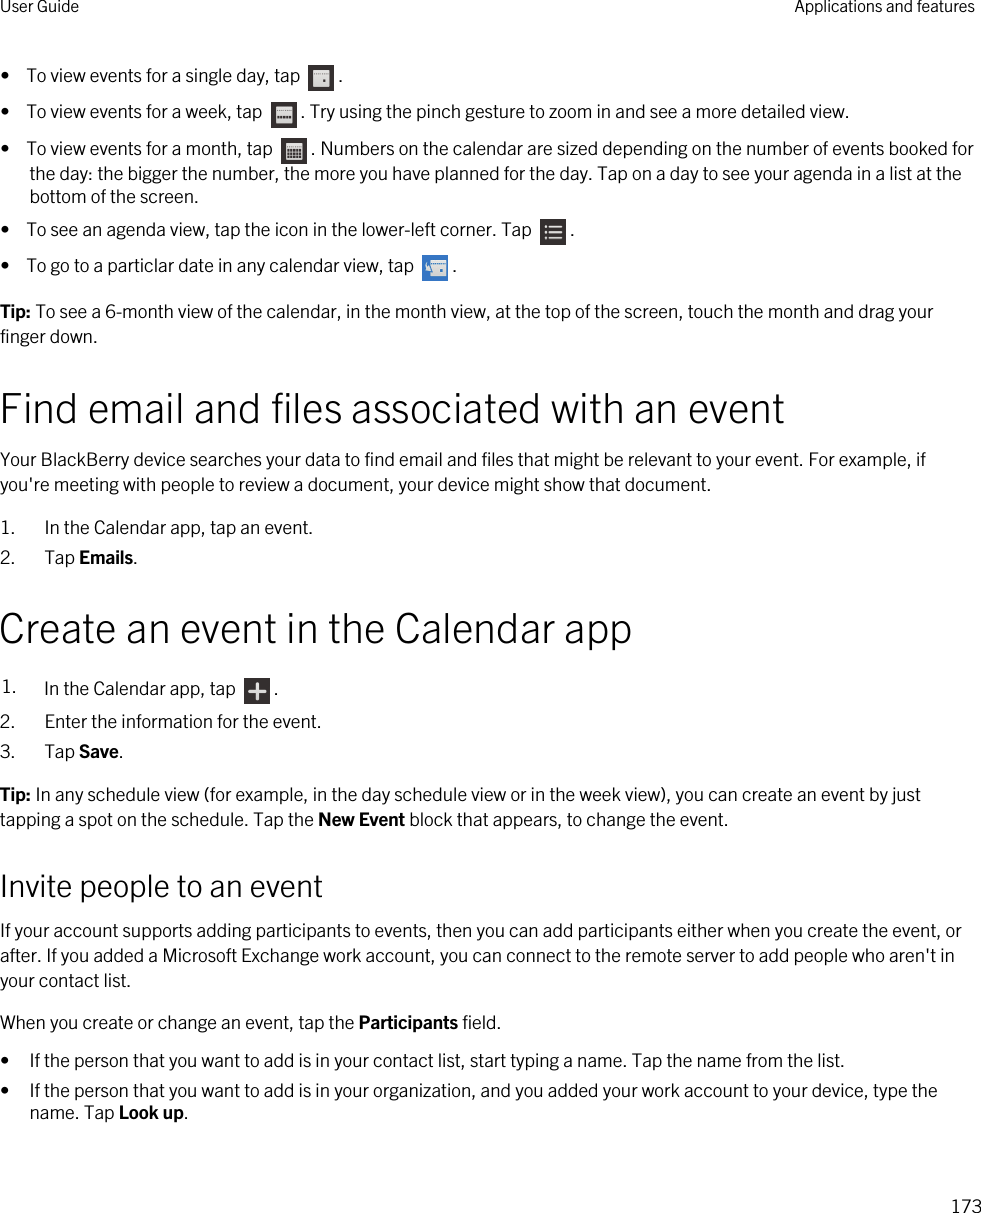 •  To view events for a single day, tap  .•  To view events for a week, tap  . Try using the pinch gesture to zoom in and see a more detailed view.•  To view events for a month, tap  . Numbers on the calendar are sized depending on the number of events booked for the day: the bigger the number, the more you have planned for the day. Tap on a day to see your agenda in a list at the bottom of the screen.•  To see an agenda view, tap the icon in the lower-left corner. Tap  .•  To go to a particlar date in any calendar view, tap  .Tip: To see a 6-month view of the calendar, in the month view, at the top of the screen, touch the month and drag your finger down.Find email and files associated with an eventYour BlackBerry device searches your data to find email and files that might be relevant to your event. For example, if you&apos;re meeting with people to review a document, your device might show that document.1. In the Calendar app, tap an event.2. Tap Emails.Create an event in the Calendar app1. In the Calendar app, tap  .2. Enter the information for the event.3. Tap Save.Tip: In any schedule view (for example, in the day schedule view or in the week view), you can create an event by just tapping a spot on the schedule. Tap the New Event block that appears, to change the event.Invite people to an eventIf your account supports adding participants to events, then you can add participants either when you create the event, or after. If you added a Microsoft Exchange work account, you can connect to the remote server to add people who aren&apos;t in your contact list.When you create or change an event, tap the Participants field.• If the person that you want to add is in your contact list, start typing a name. Tap the name from the list.• If the person that you want to add is in your organization, and you added your work account to your device, type the name. Tap Look up.User Guide Applications and features173